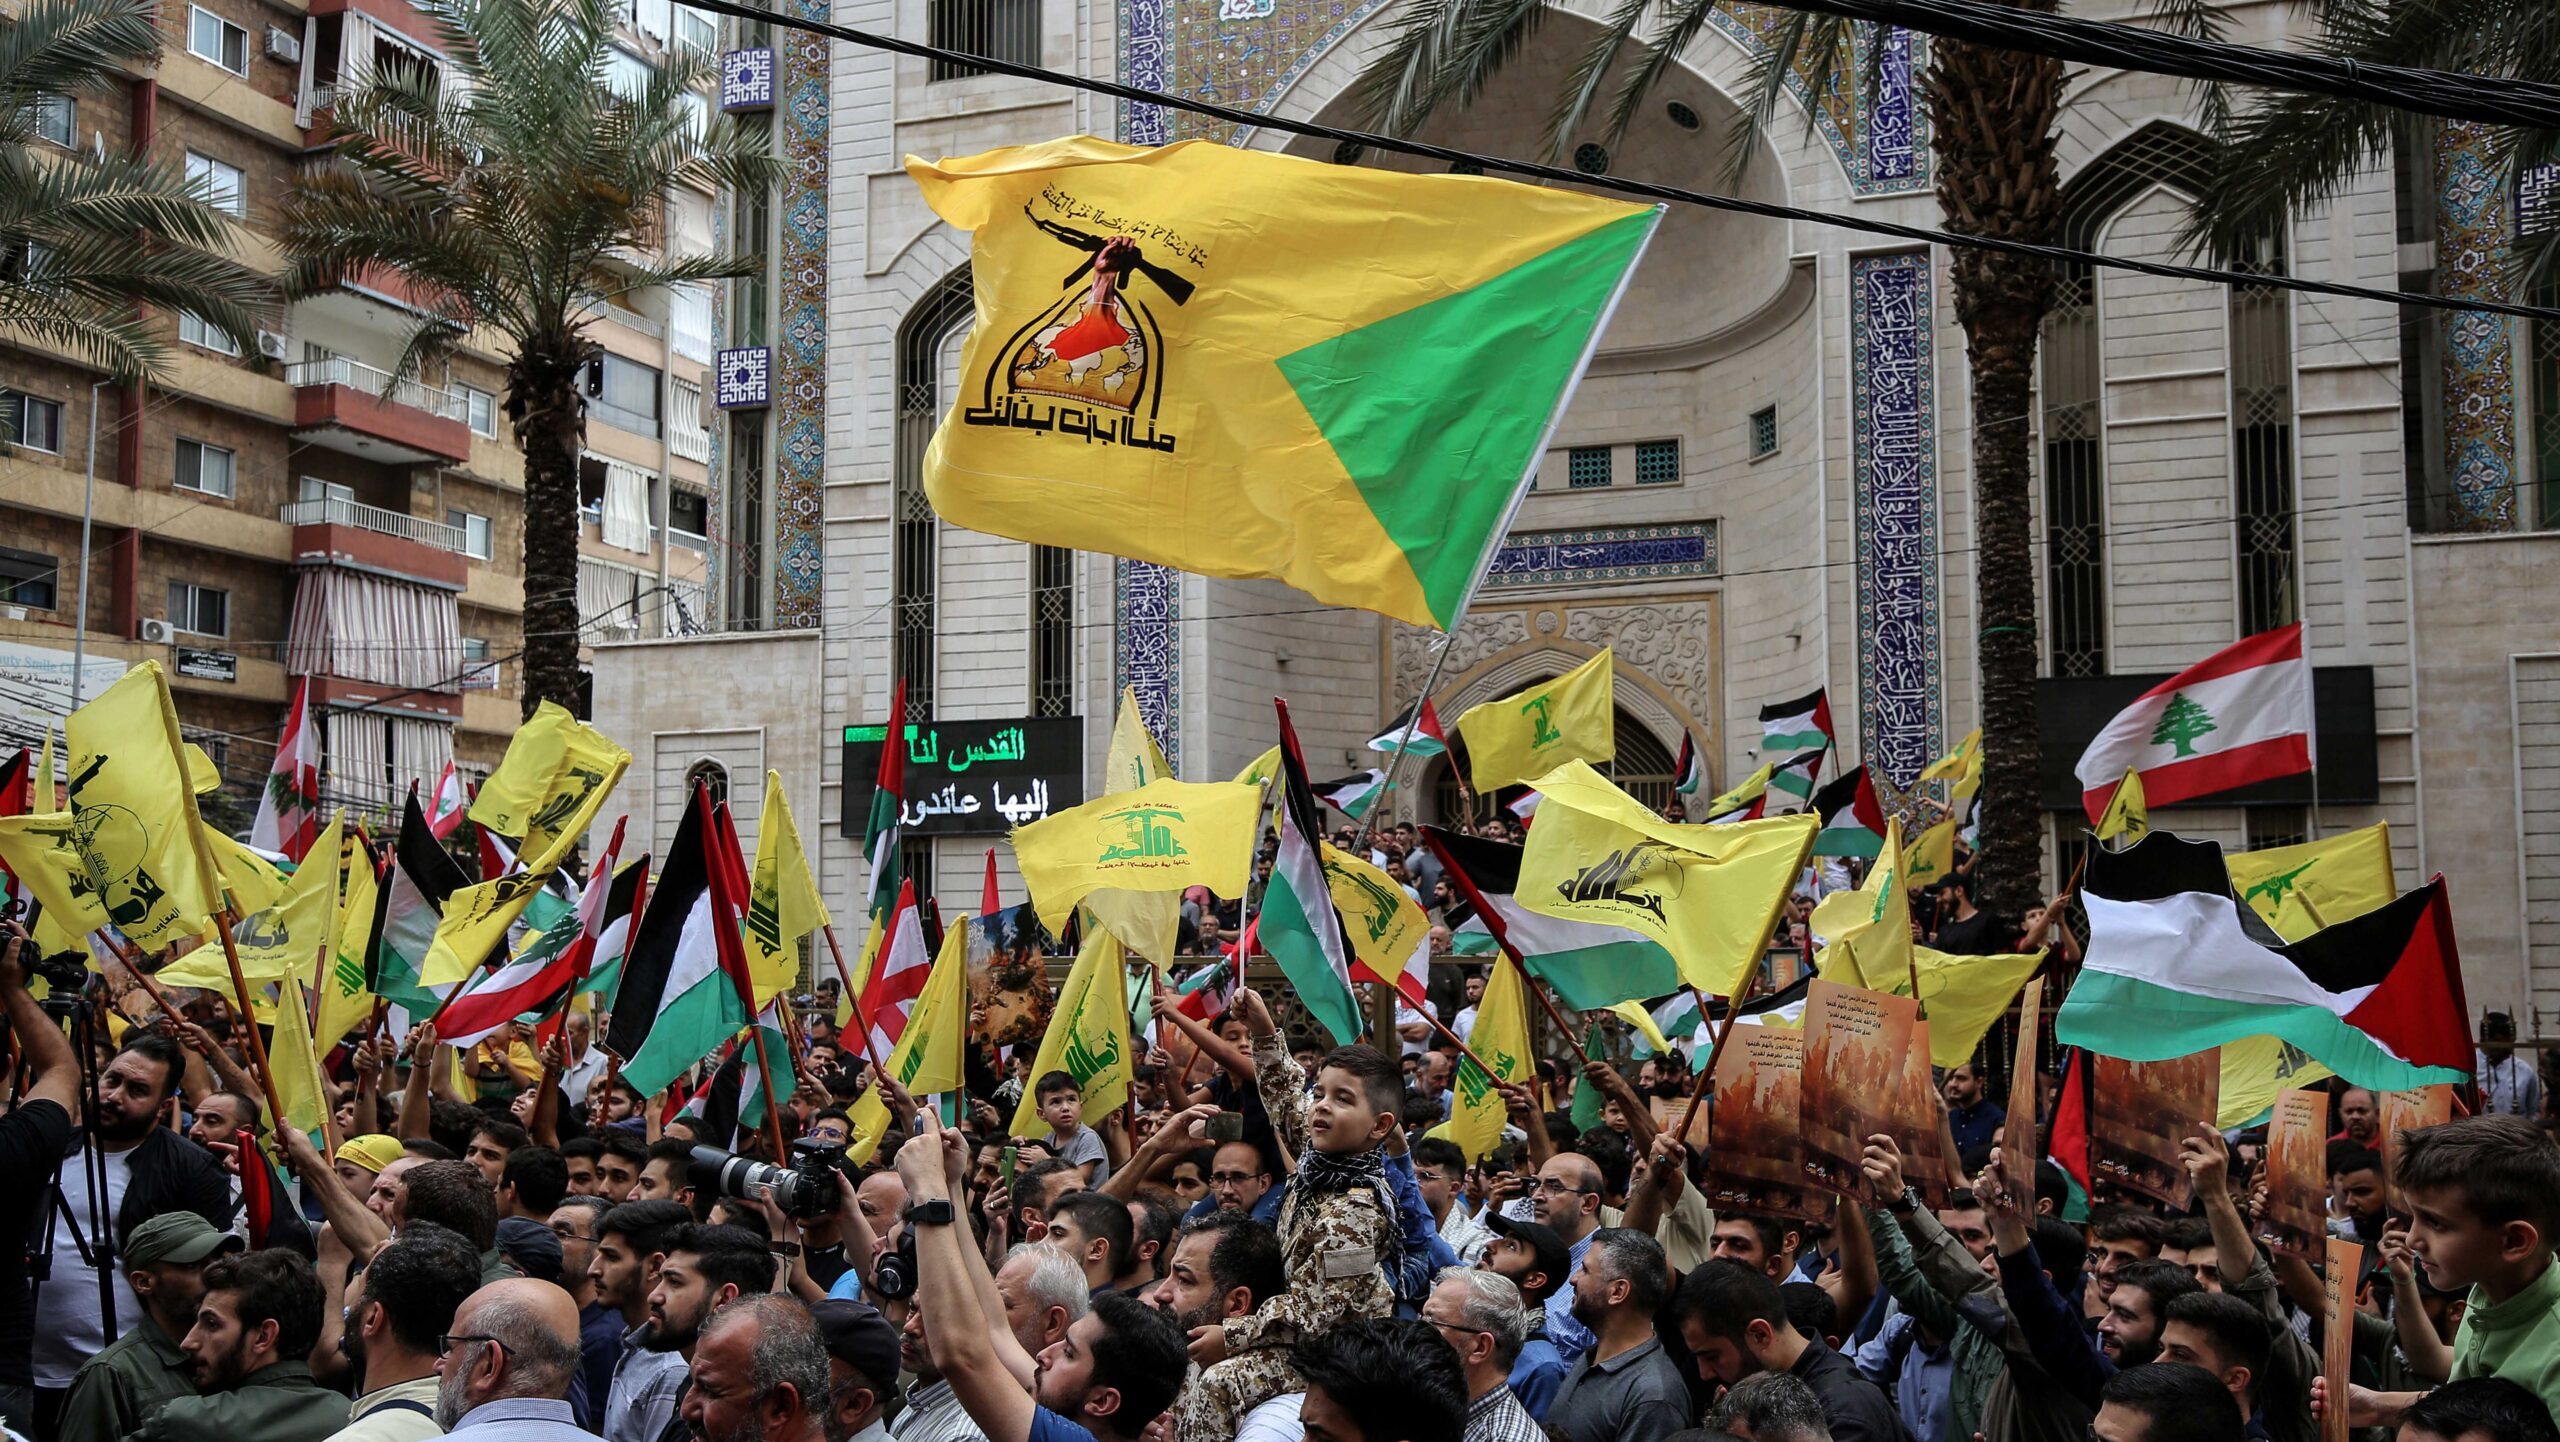 Hezbollah pro-Palestinian rally in Beirut